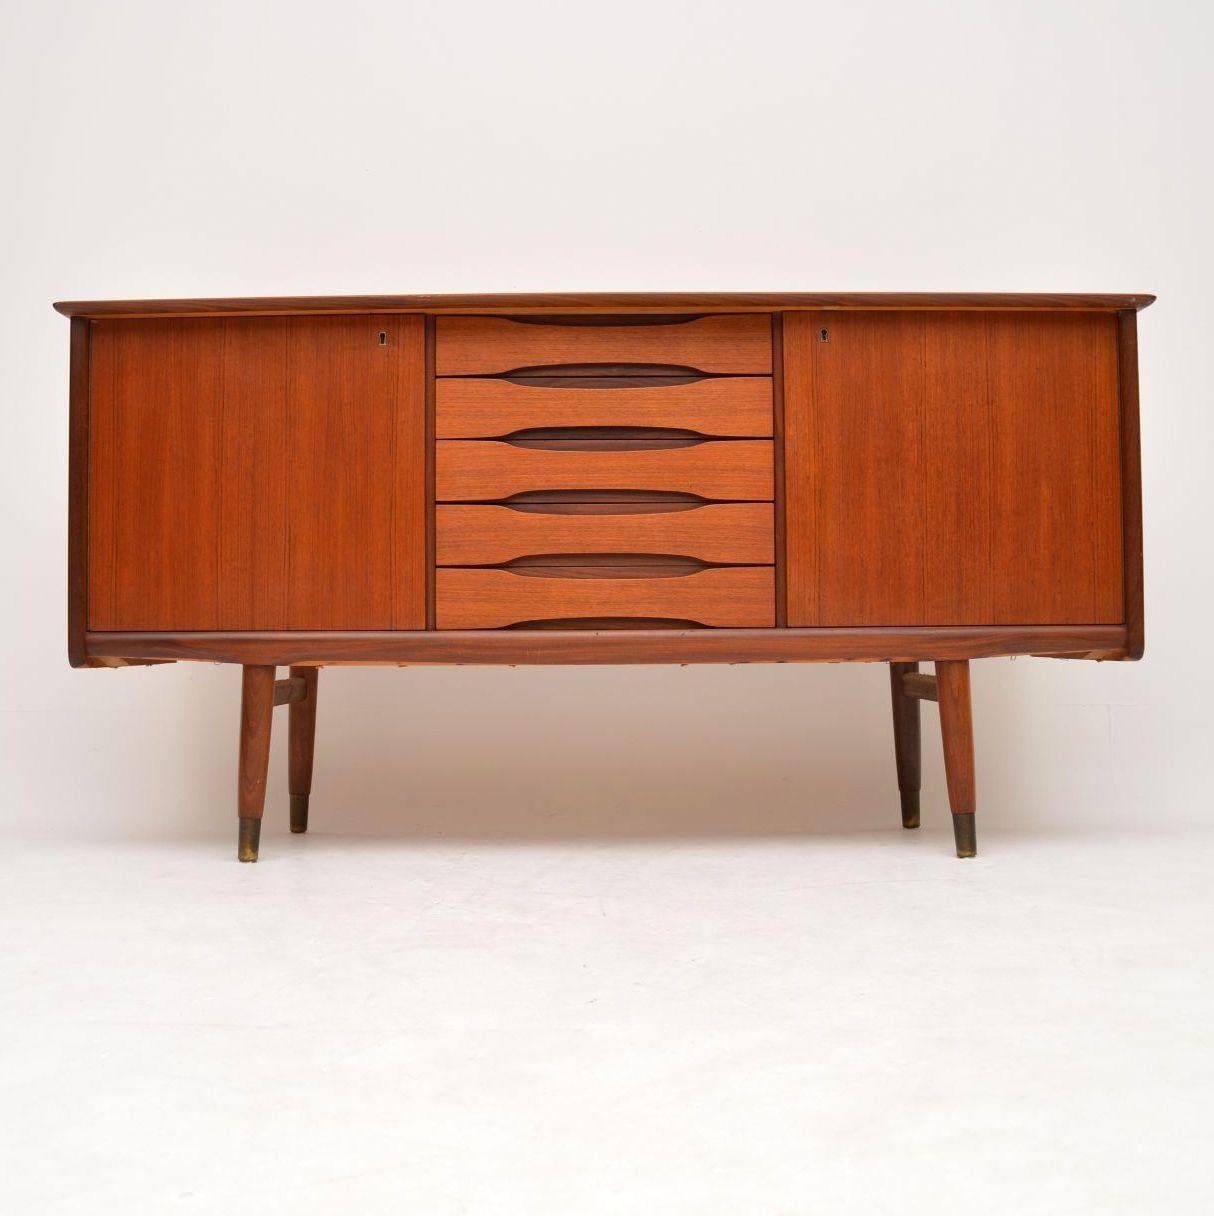 A stunning and rare vintage teak sideboard, this was made in Norway during the 1960s by Gustav Bahus, it was designed by Fredrik Kayser. It has a beautiful design, is of amazing quality and is a very practical size. The condition is excellent for